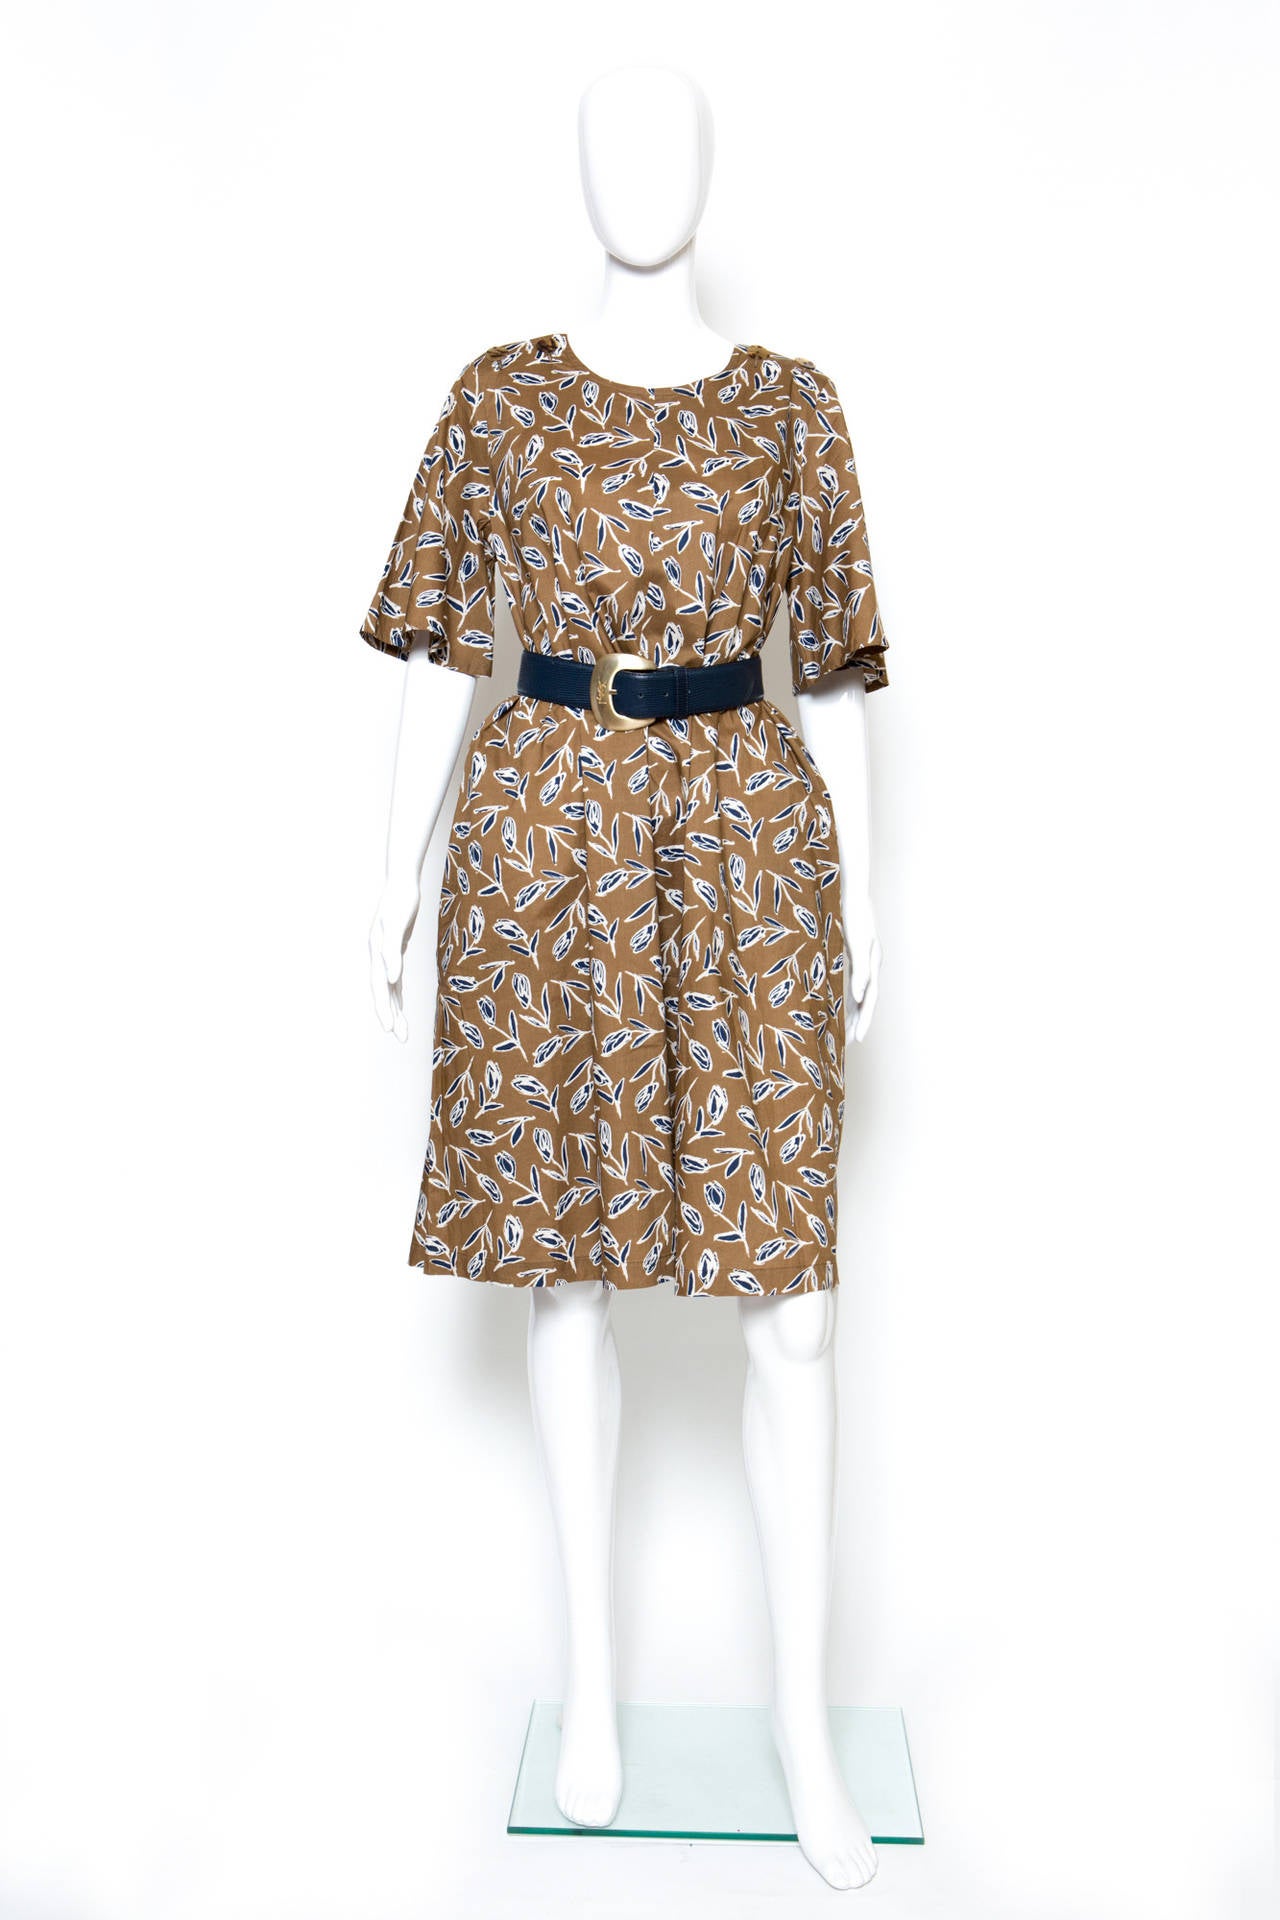 A 1980s Yves Saint Laurent peasant cotton dress in a fantastic tulip print with three quarter length flouncy sleeves, a round neckline with shoulder decorative buttons and side pockets. The dress comes with a leather blue Yves Saint-Laurent belt